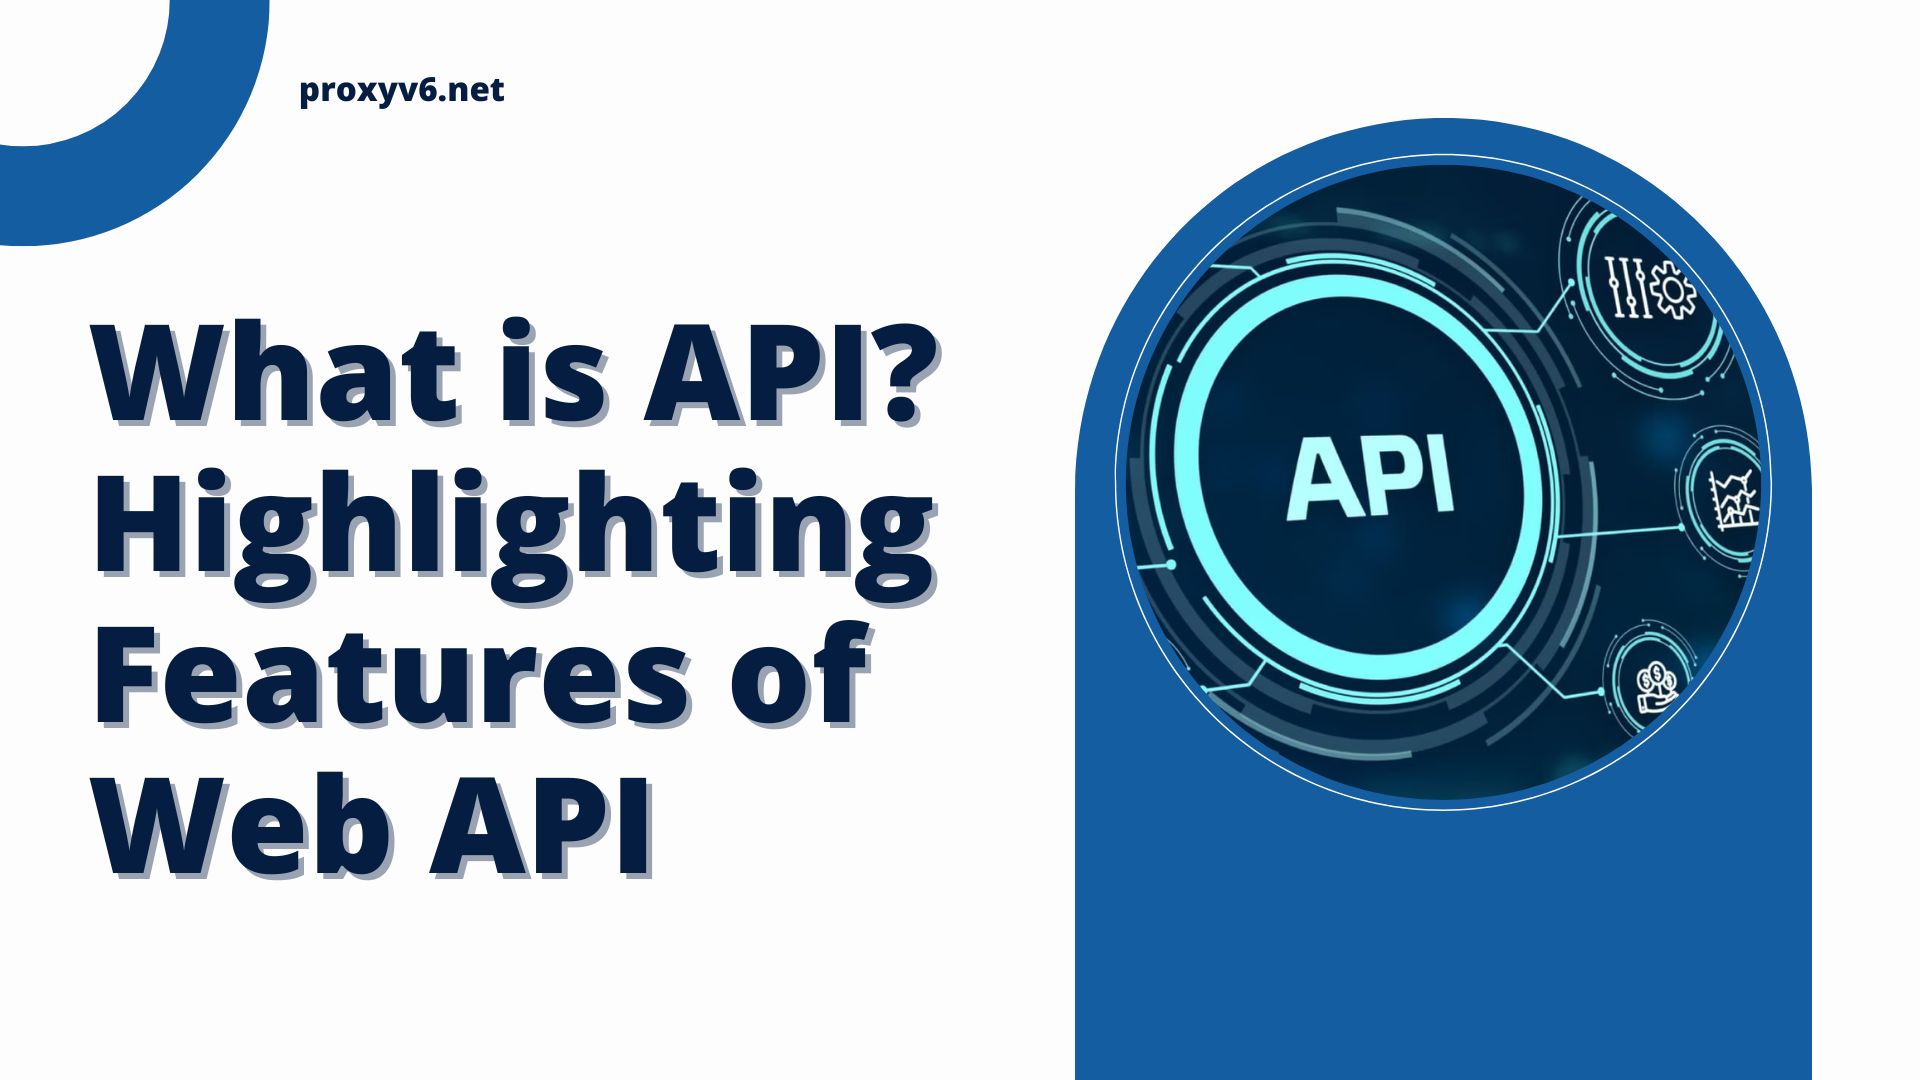 What is API? Highlighting Features of Web API